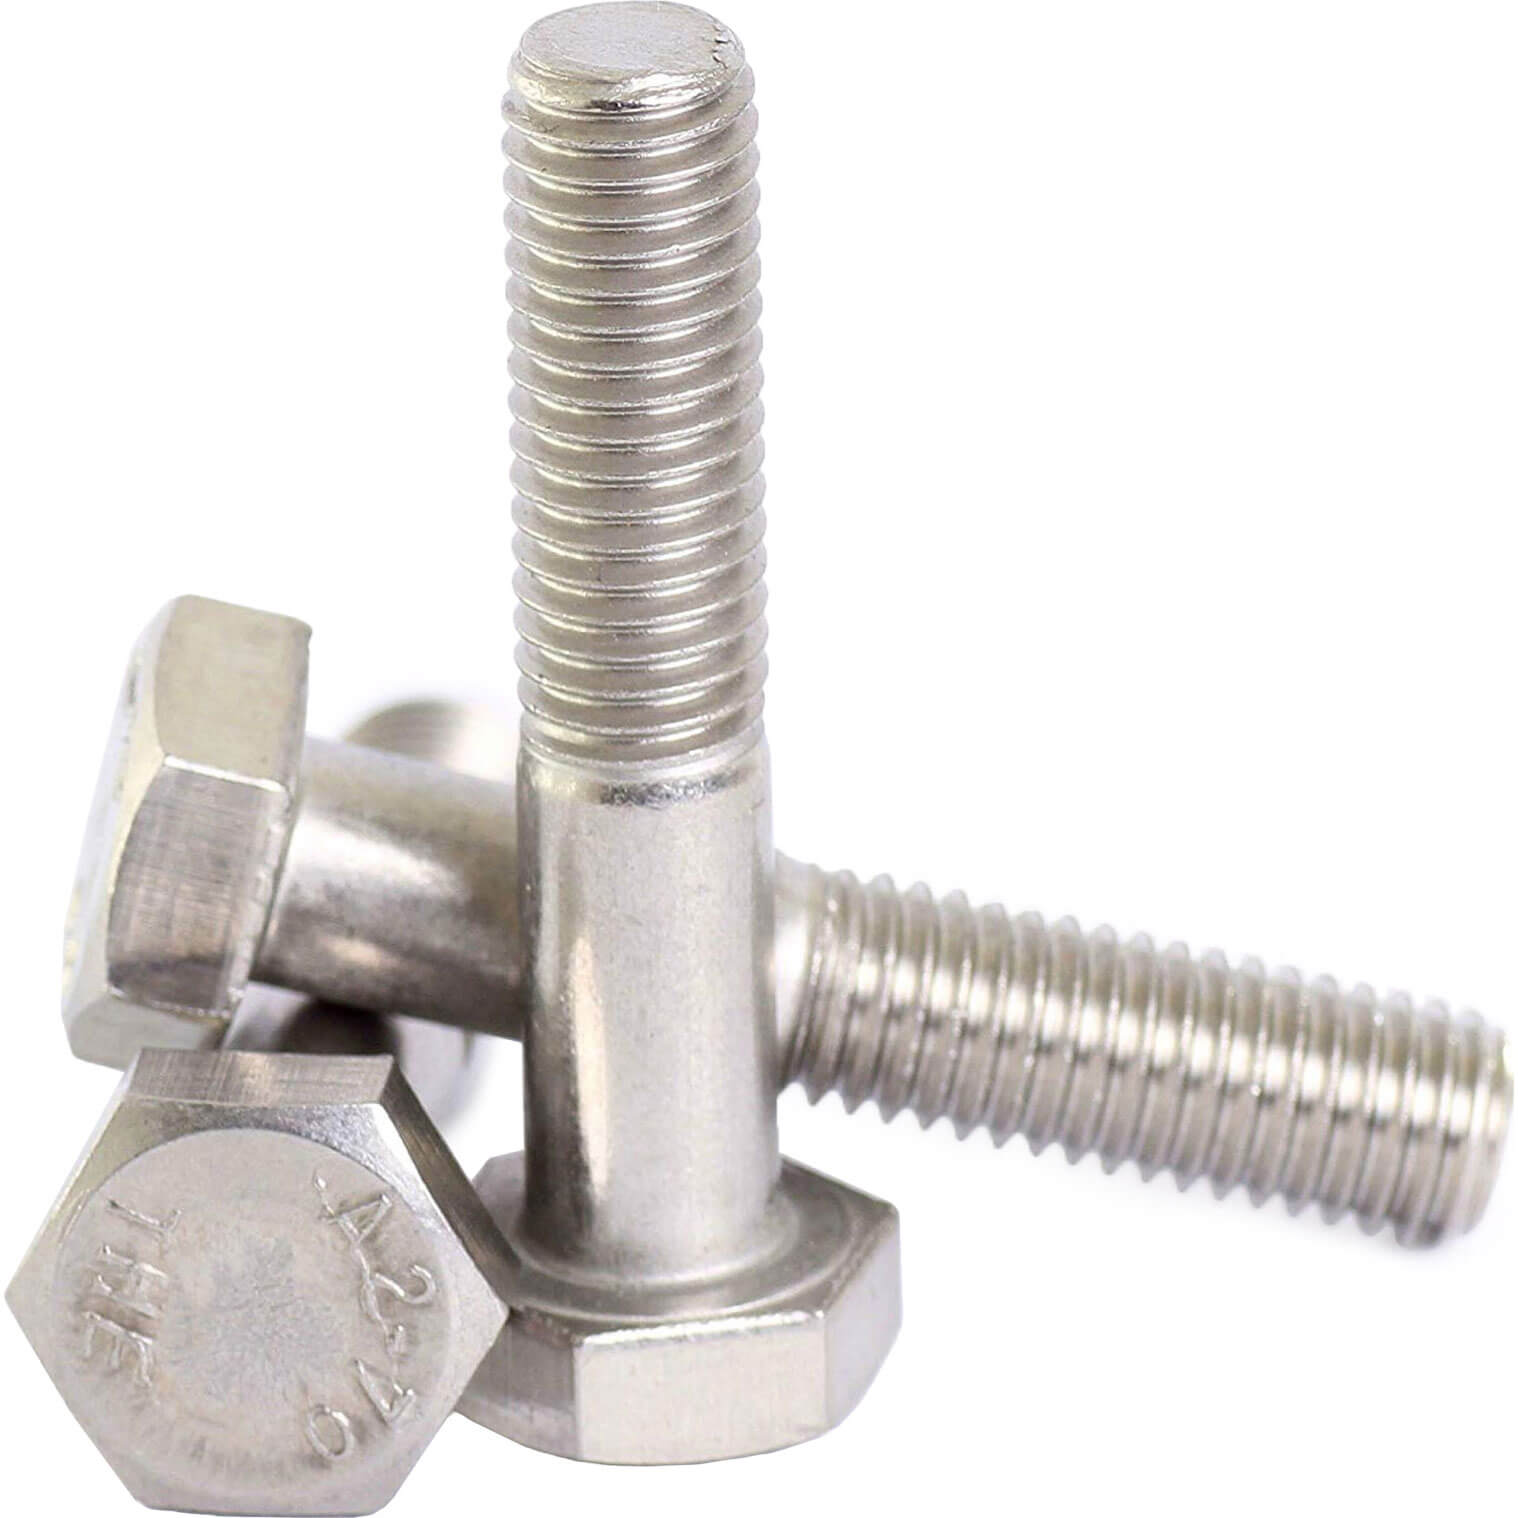 Image of Sirius Bolts A2 304 Stainless Steel M16 60mm Pack of 1